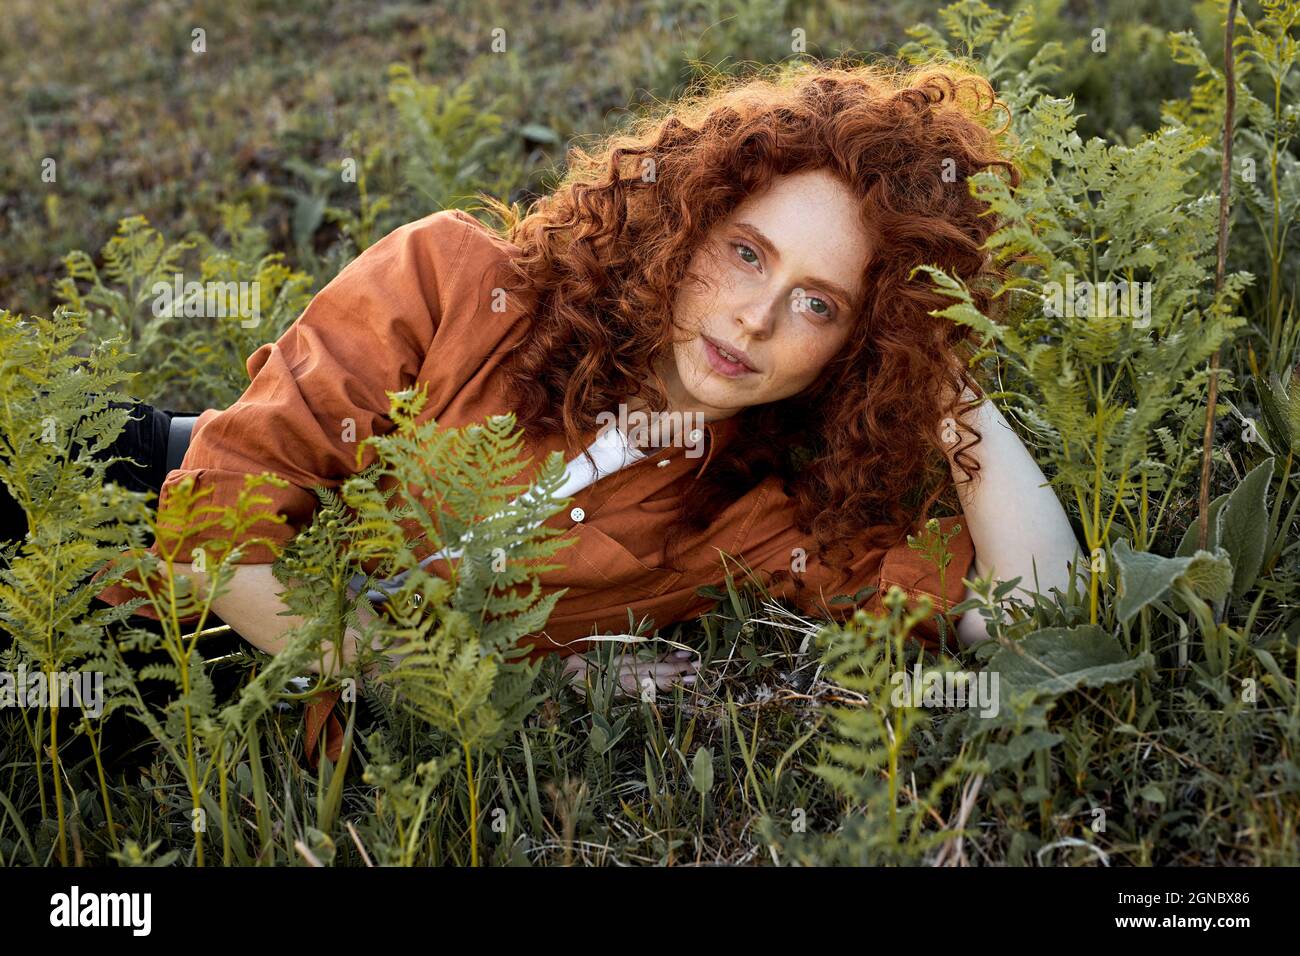 redhead woman lying on grass surrounded by fantastic fairy plants, curly lady with natural red hair posing at camera, wearing orange casual shirt, in Stock Photo